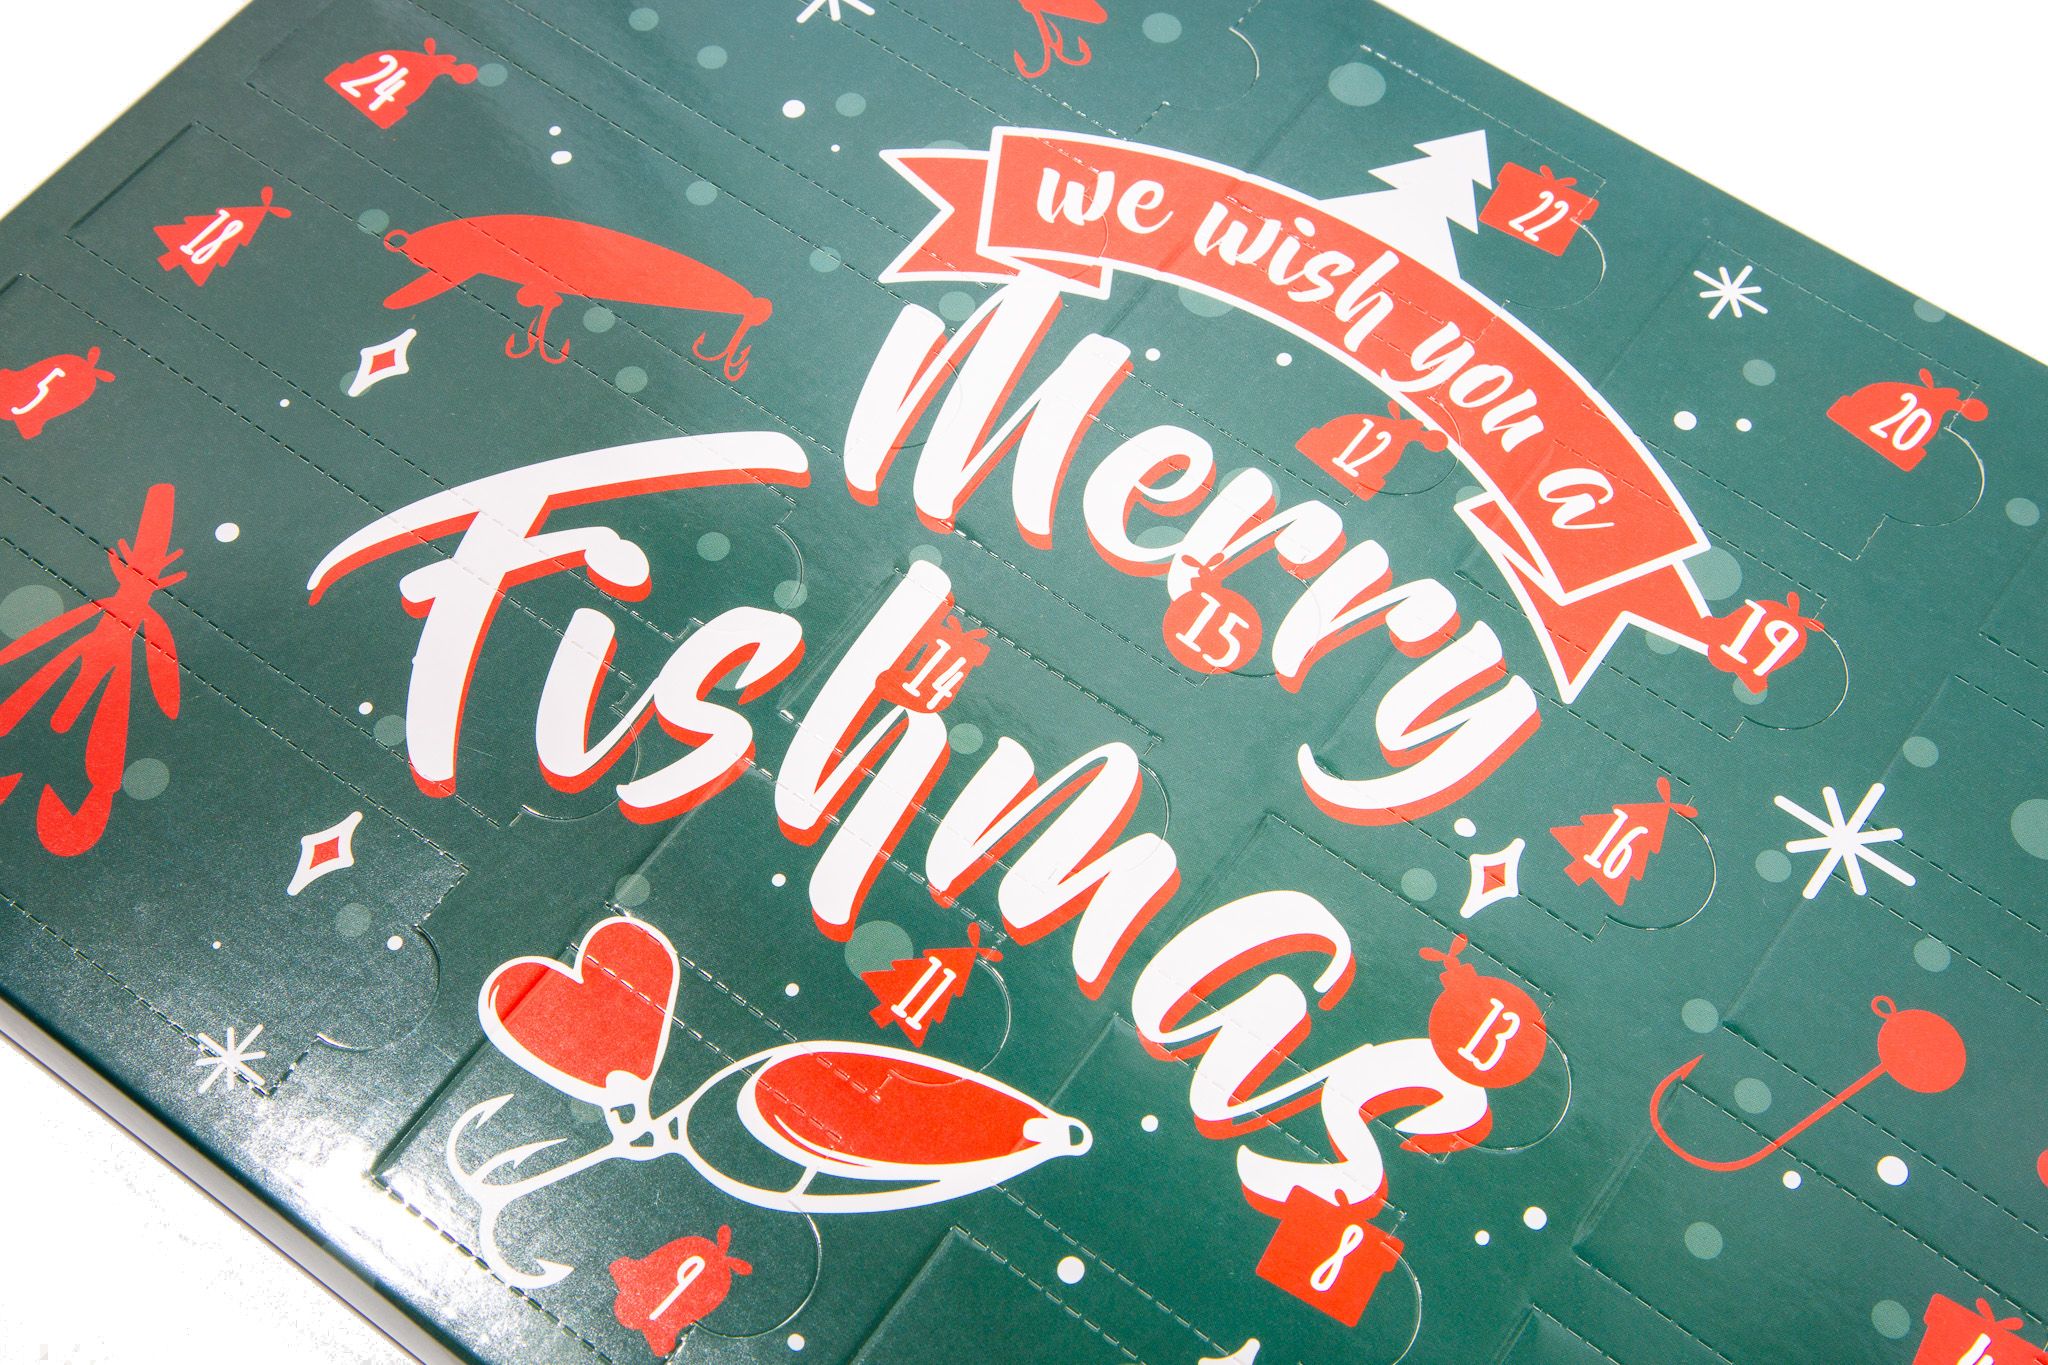 Merry Fishmas Advent Calendar (24 days of gifts!)